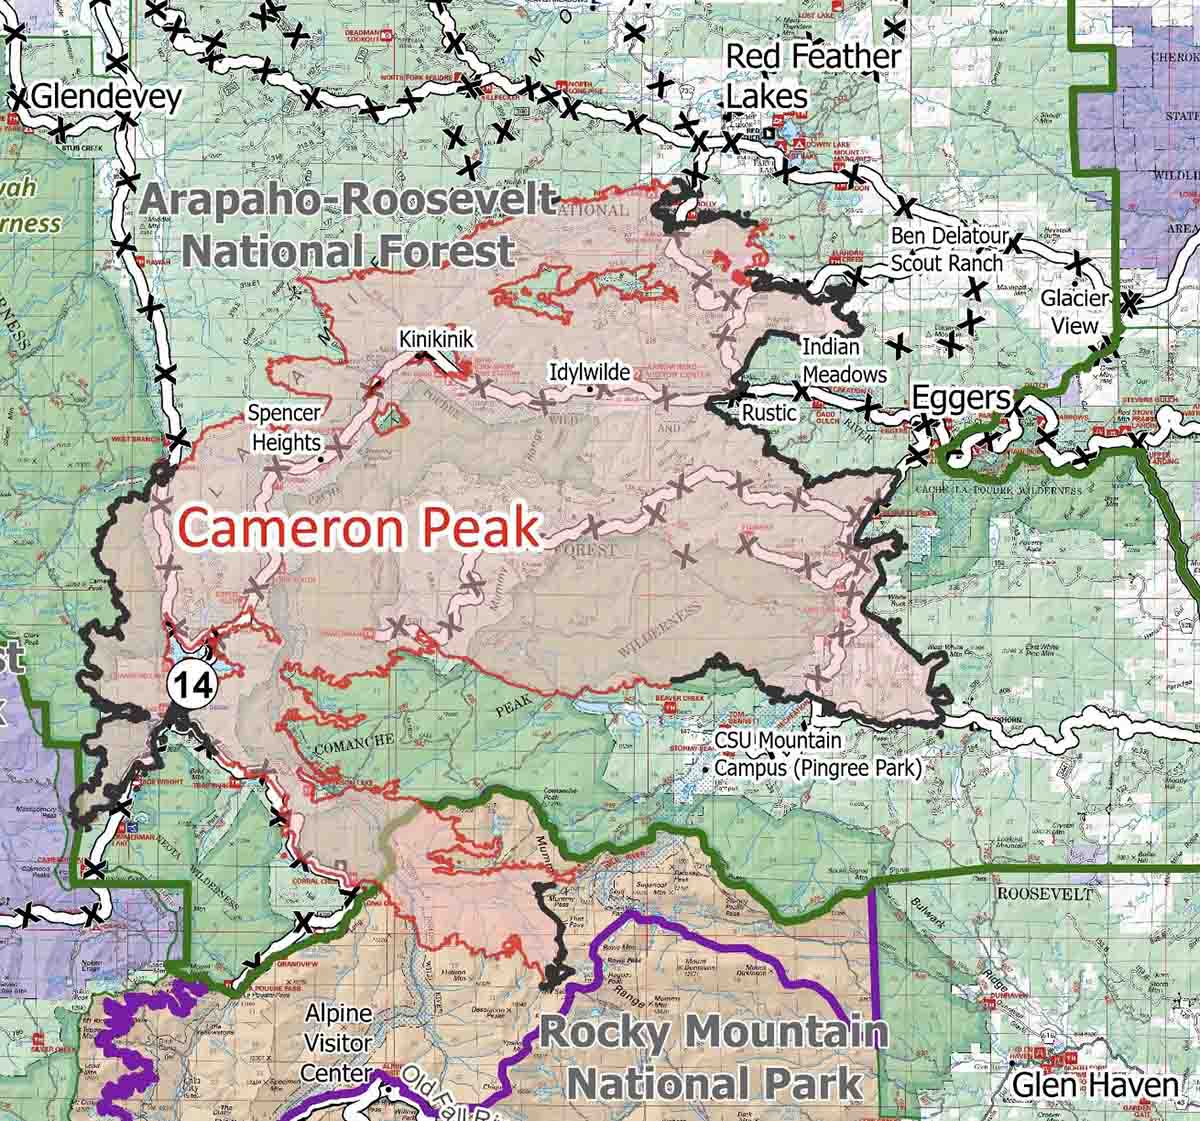 Map of the Cameron Peak Fire